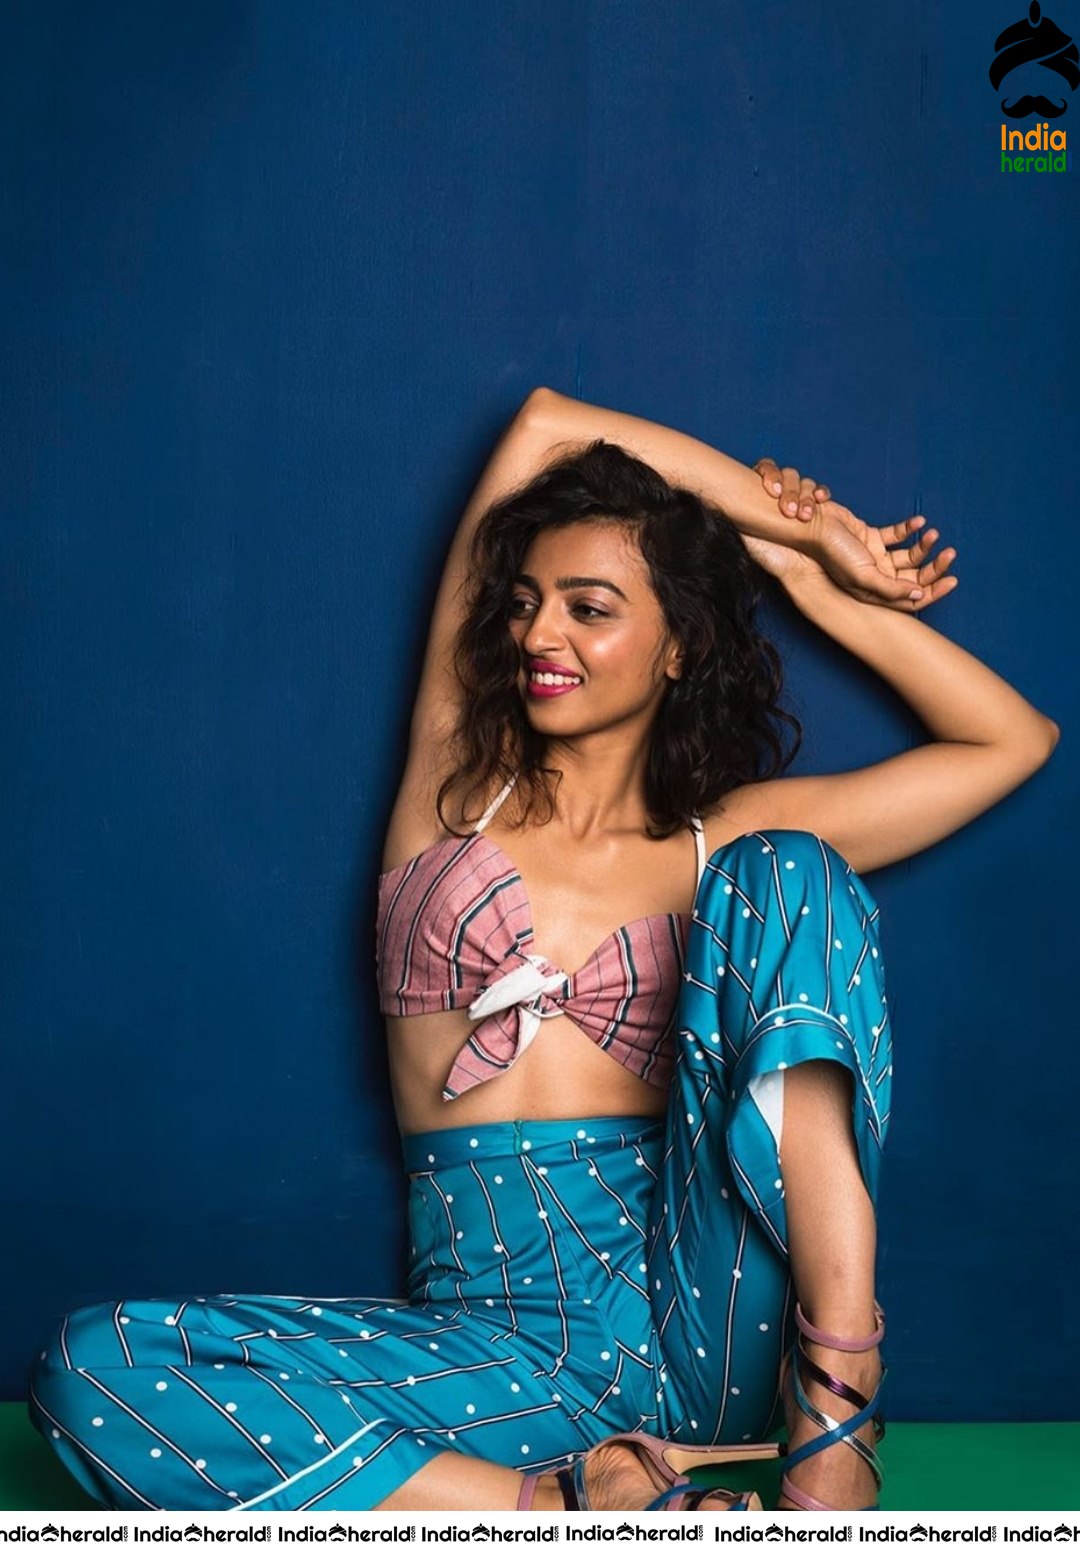 Radhika Apte Hottest Sexy Photos Collection to tease your inner temptations Set 3